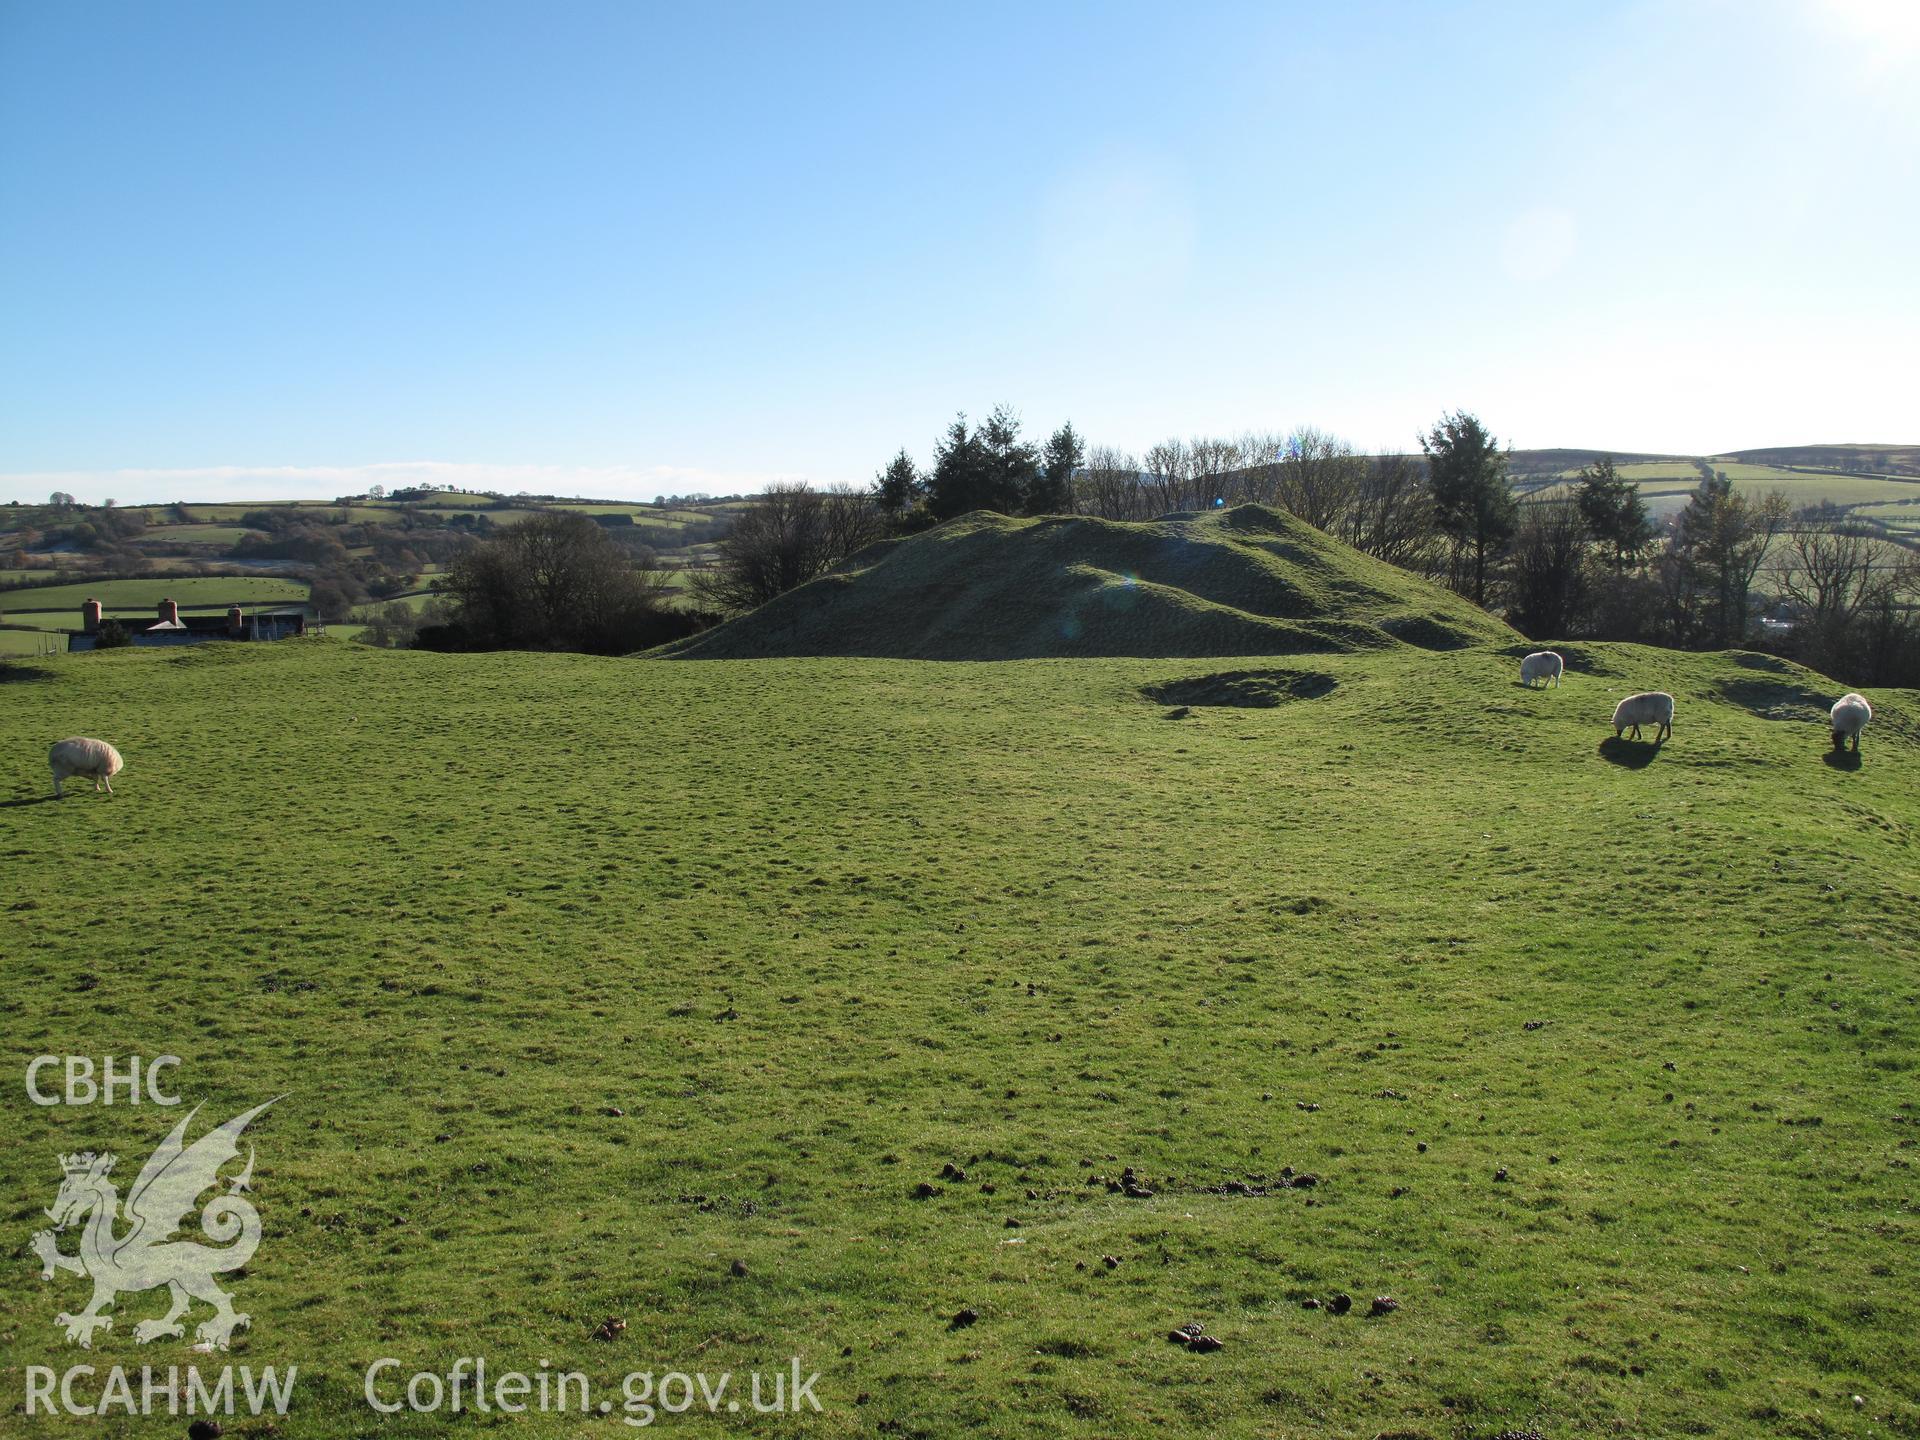 Painscastle motte from the northwest, taken by Brian Malaws on 15 November 2010.